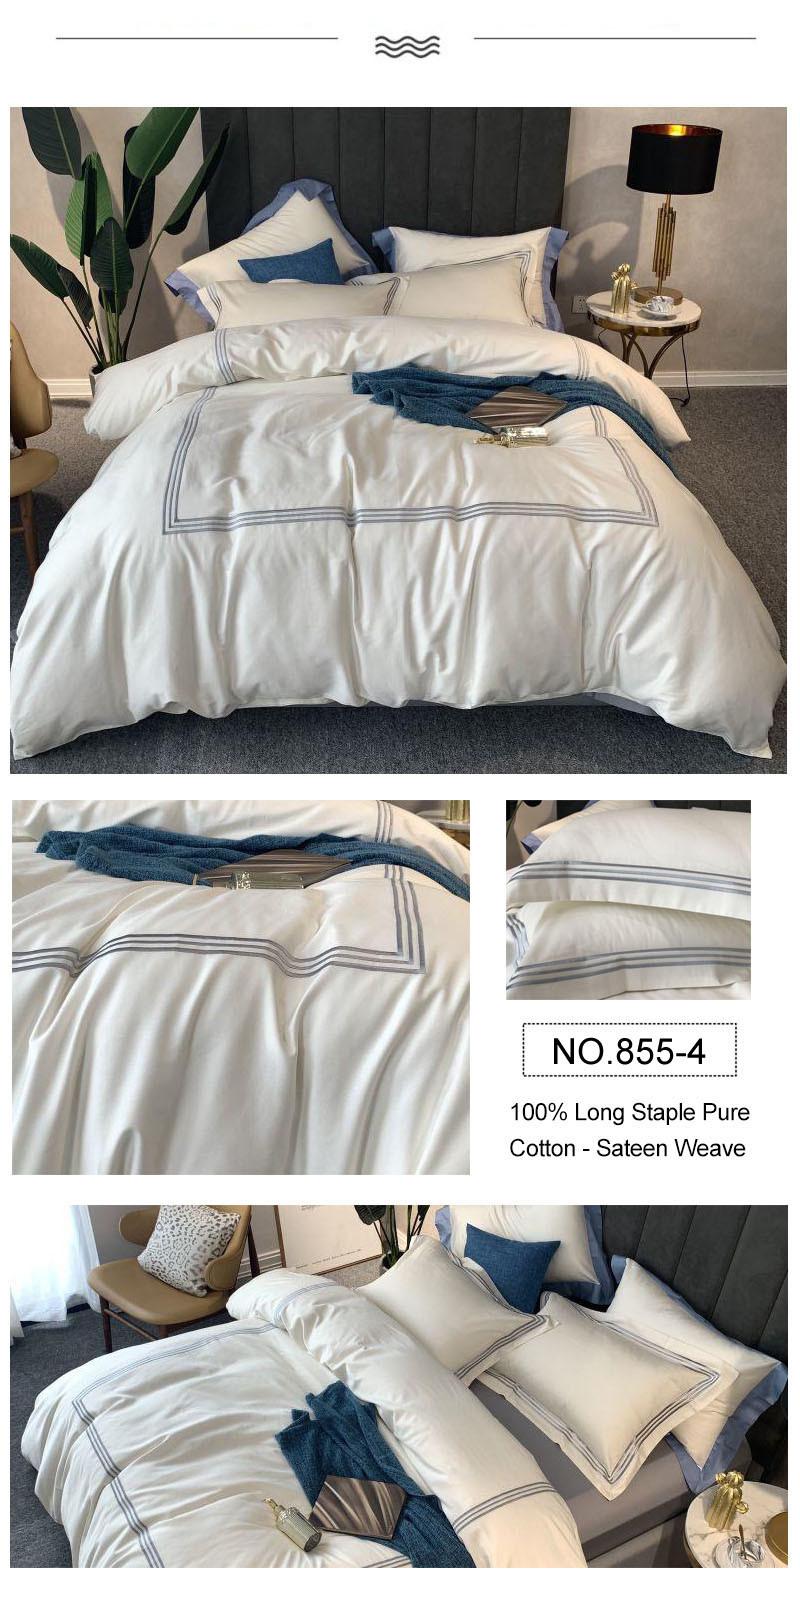 Luxury New Product White Sheet Set Cotton Fabric for Double Bed